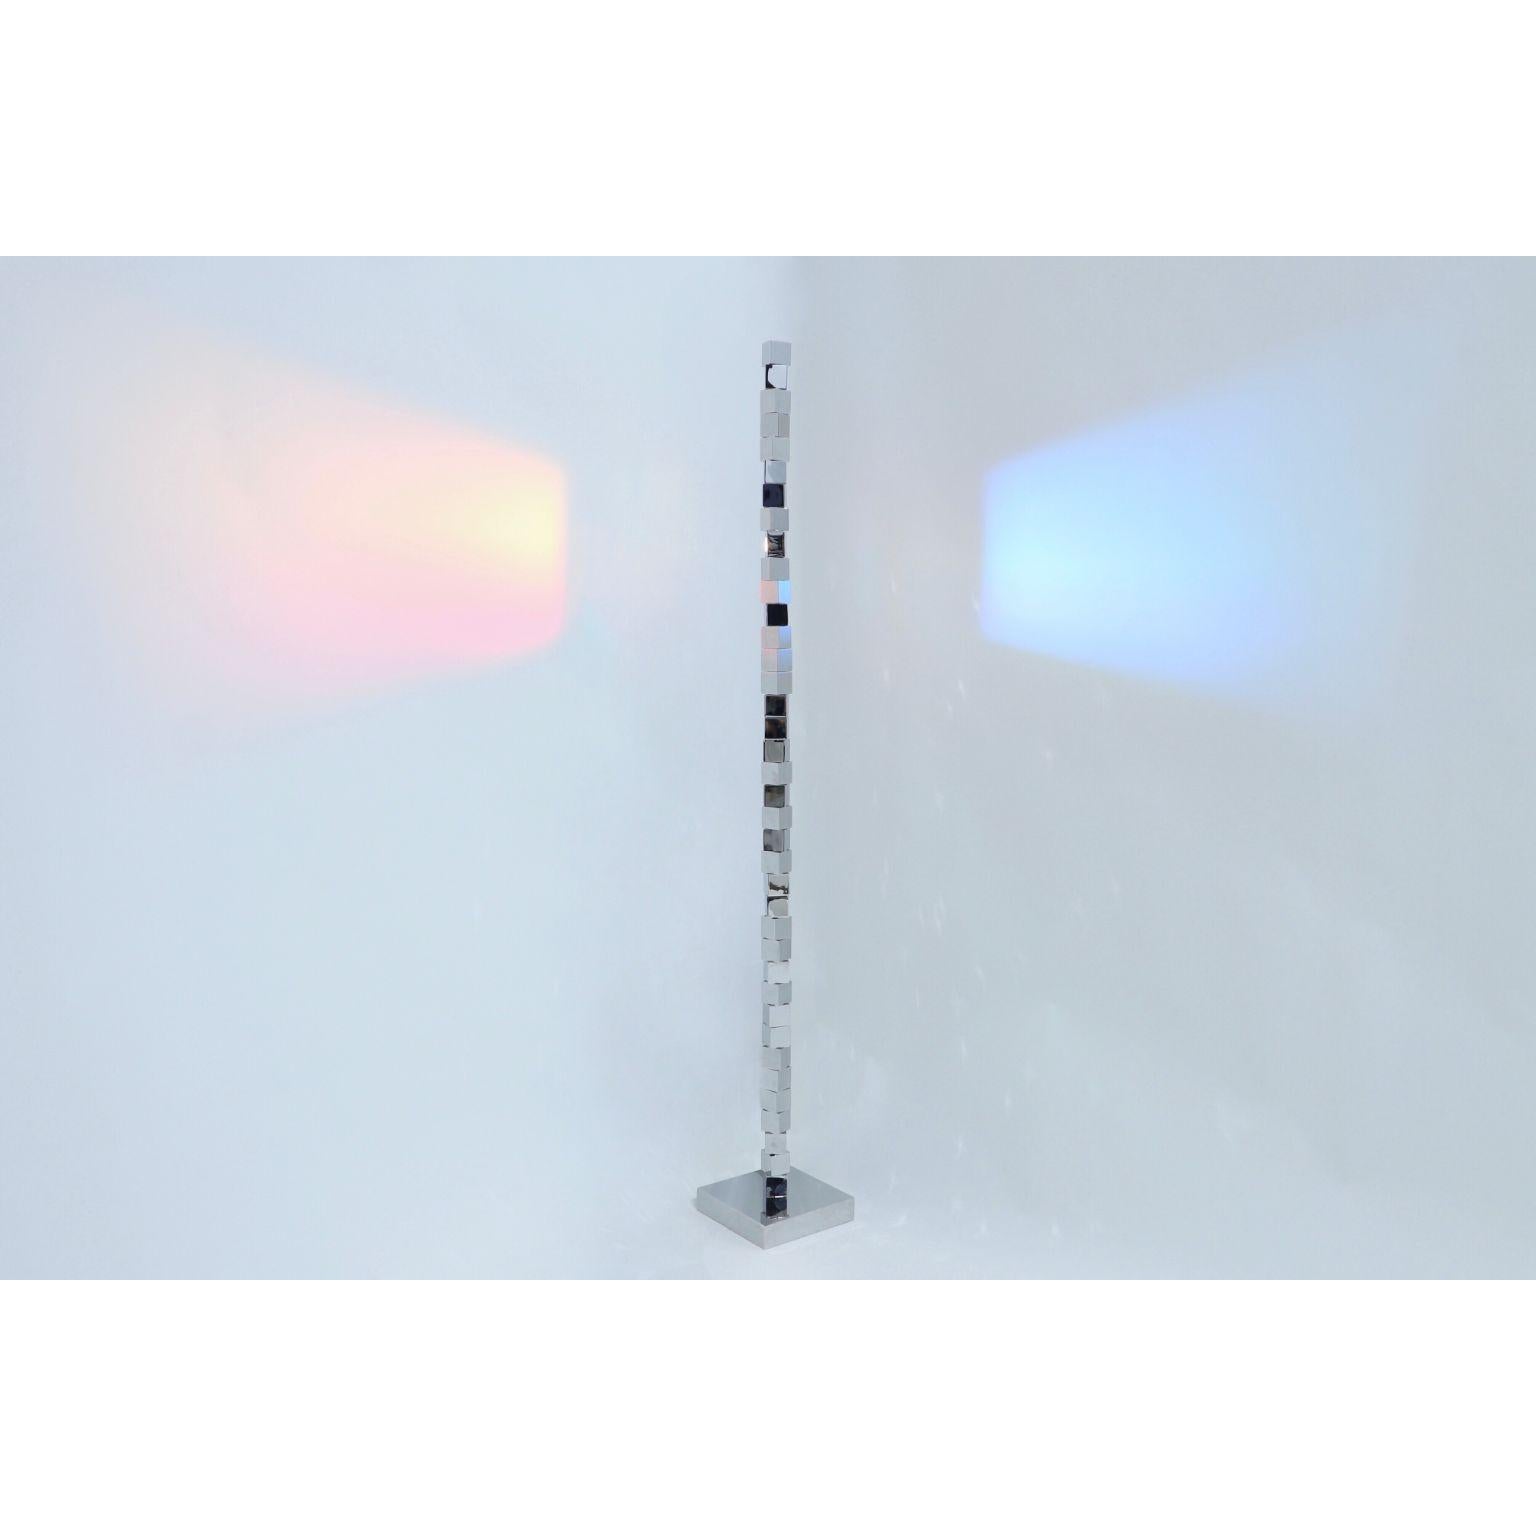 Ocean flame floor lamp by The Shaw
Dimensions: D24 x W 24 x H 180 cm
Materials: Stainless Steel
Weight: 13 kg

All our lamps can be wired according to each country. If sold to the USA it will be wired for the USA for instance.

